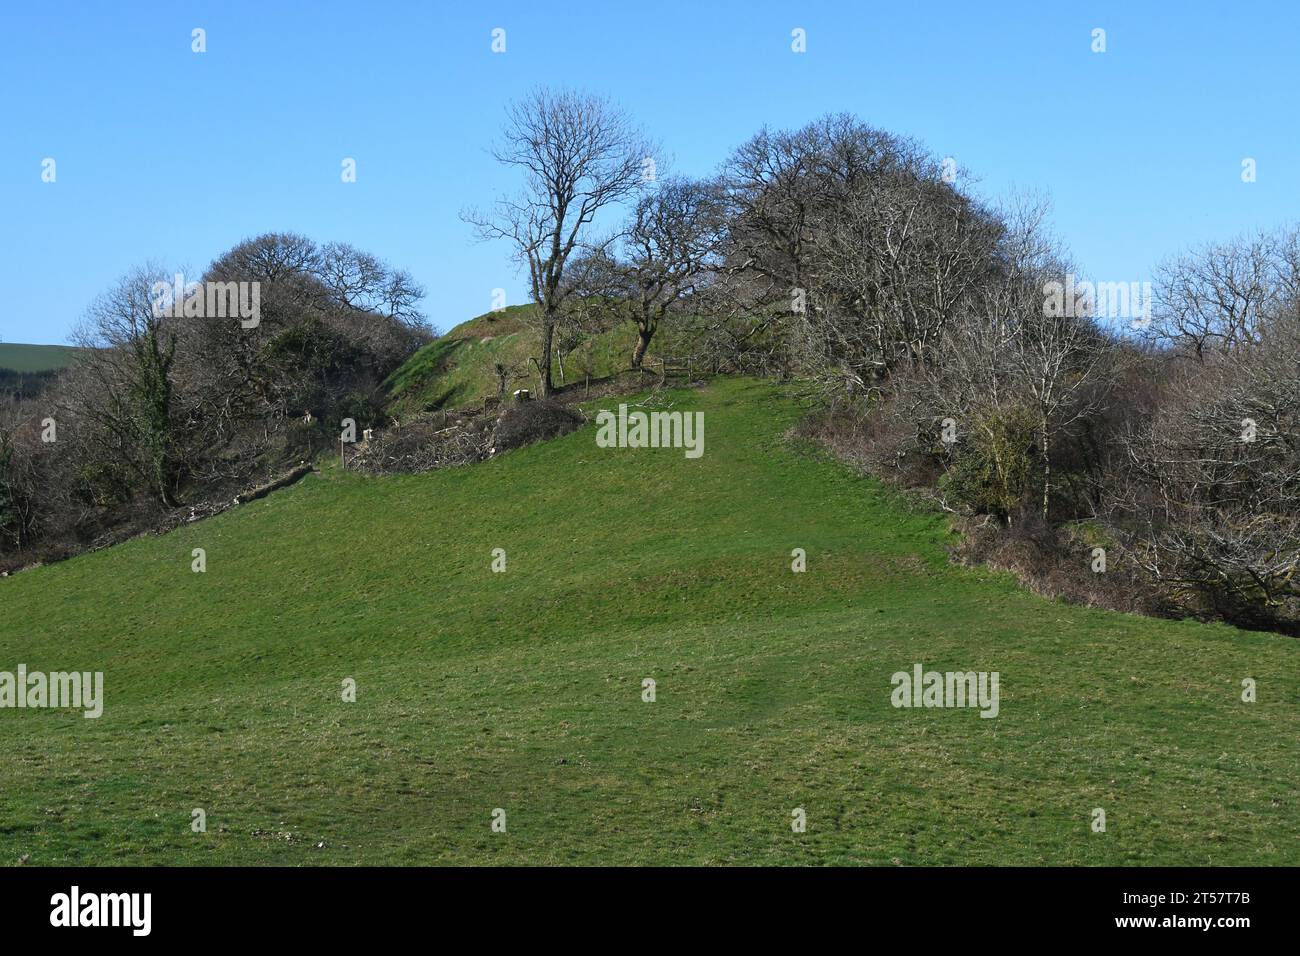 Kilkhampton castle also known as Penstowe Castle, medieval fort of Motte and Bailey construction built on a knoll protected by steep slopes. The forti Stock Photo